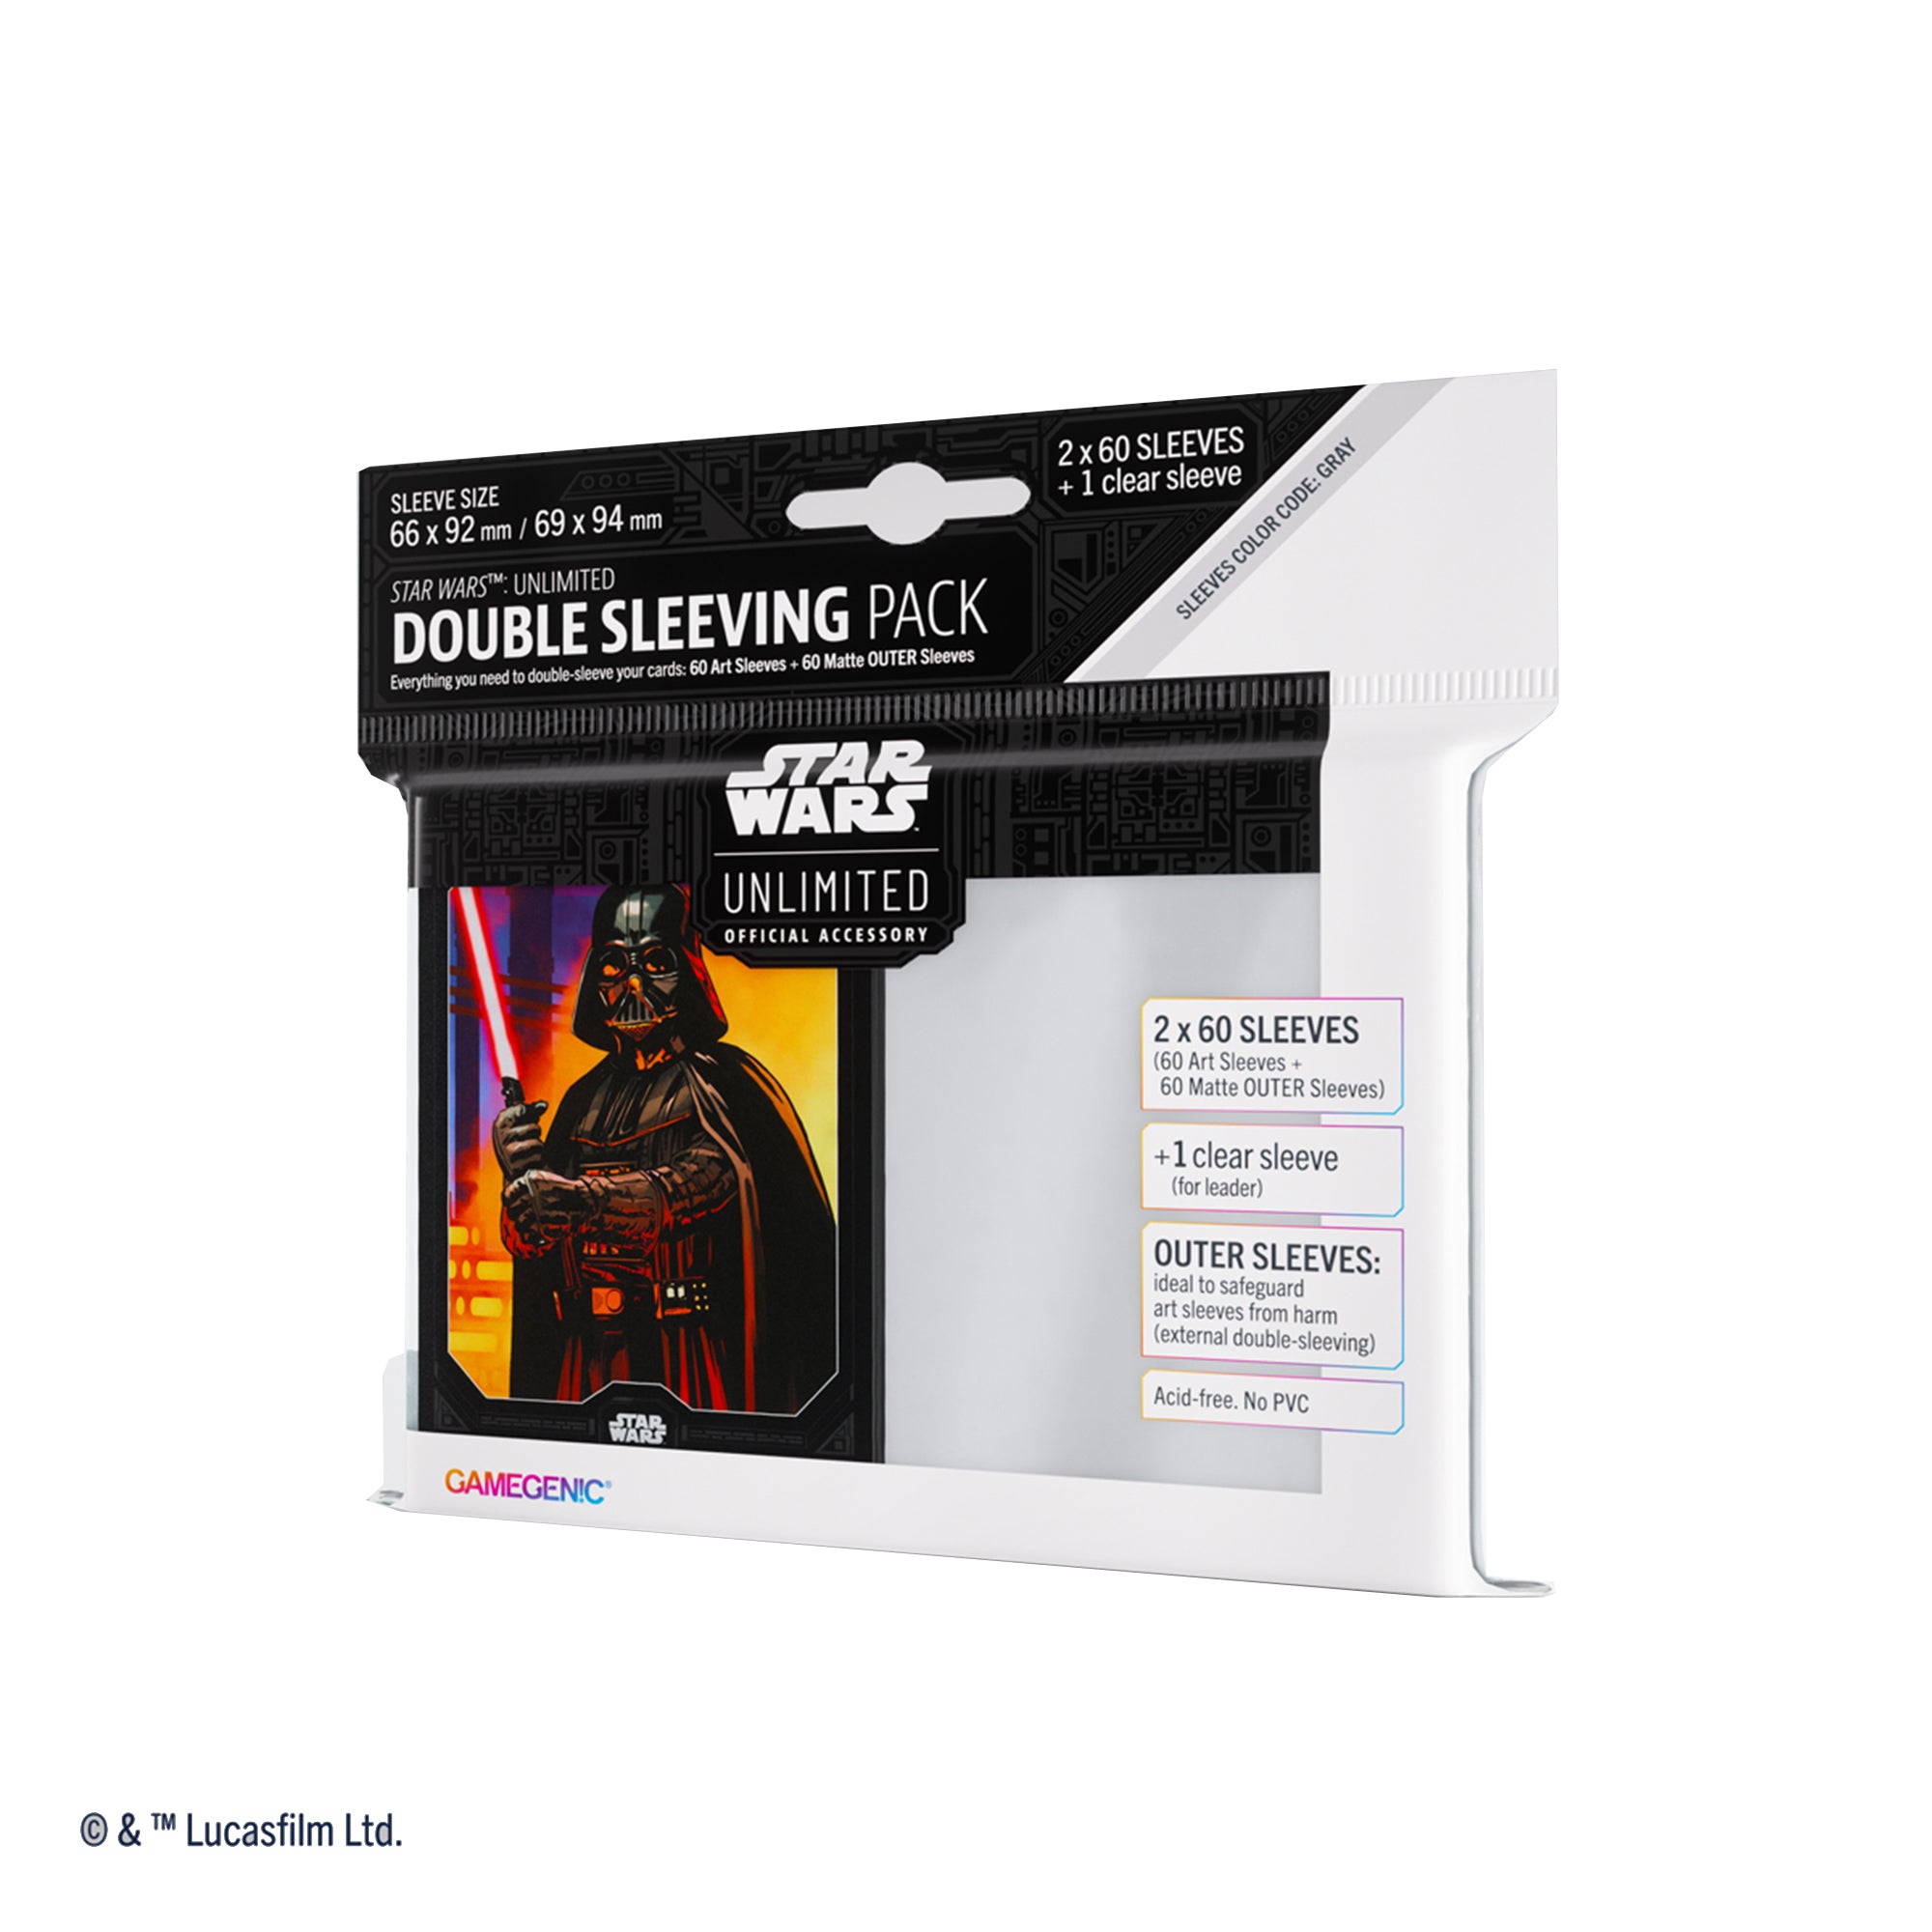 Star Wars Unlimited: Double Sleeving - Darth Vader